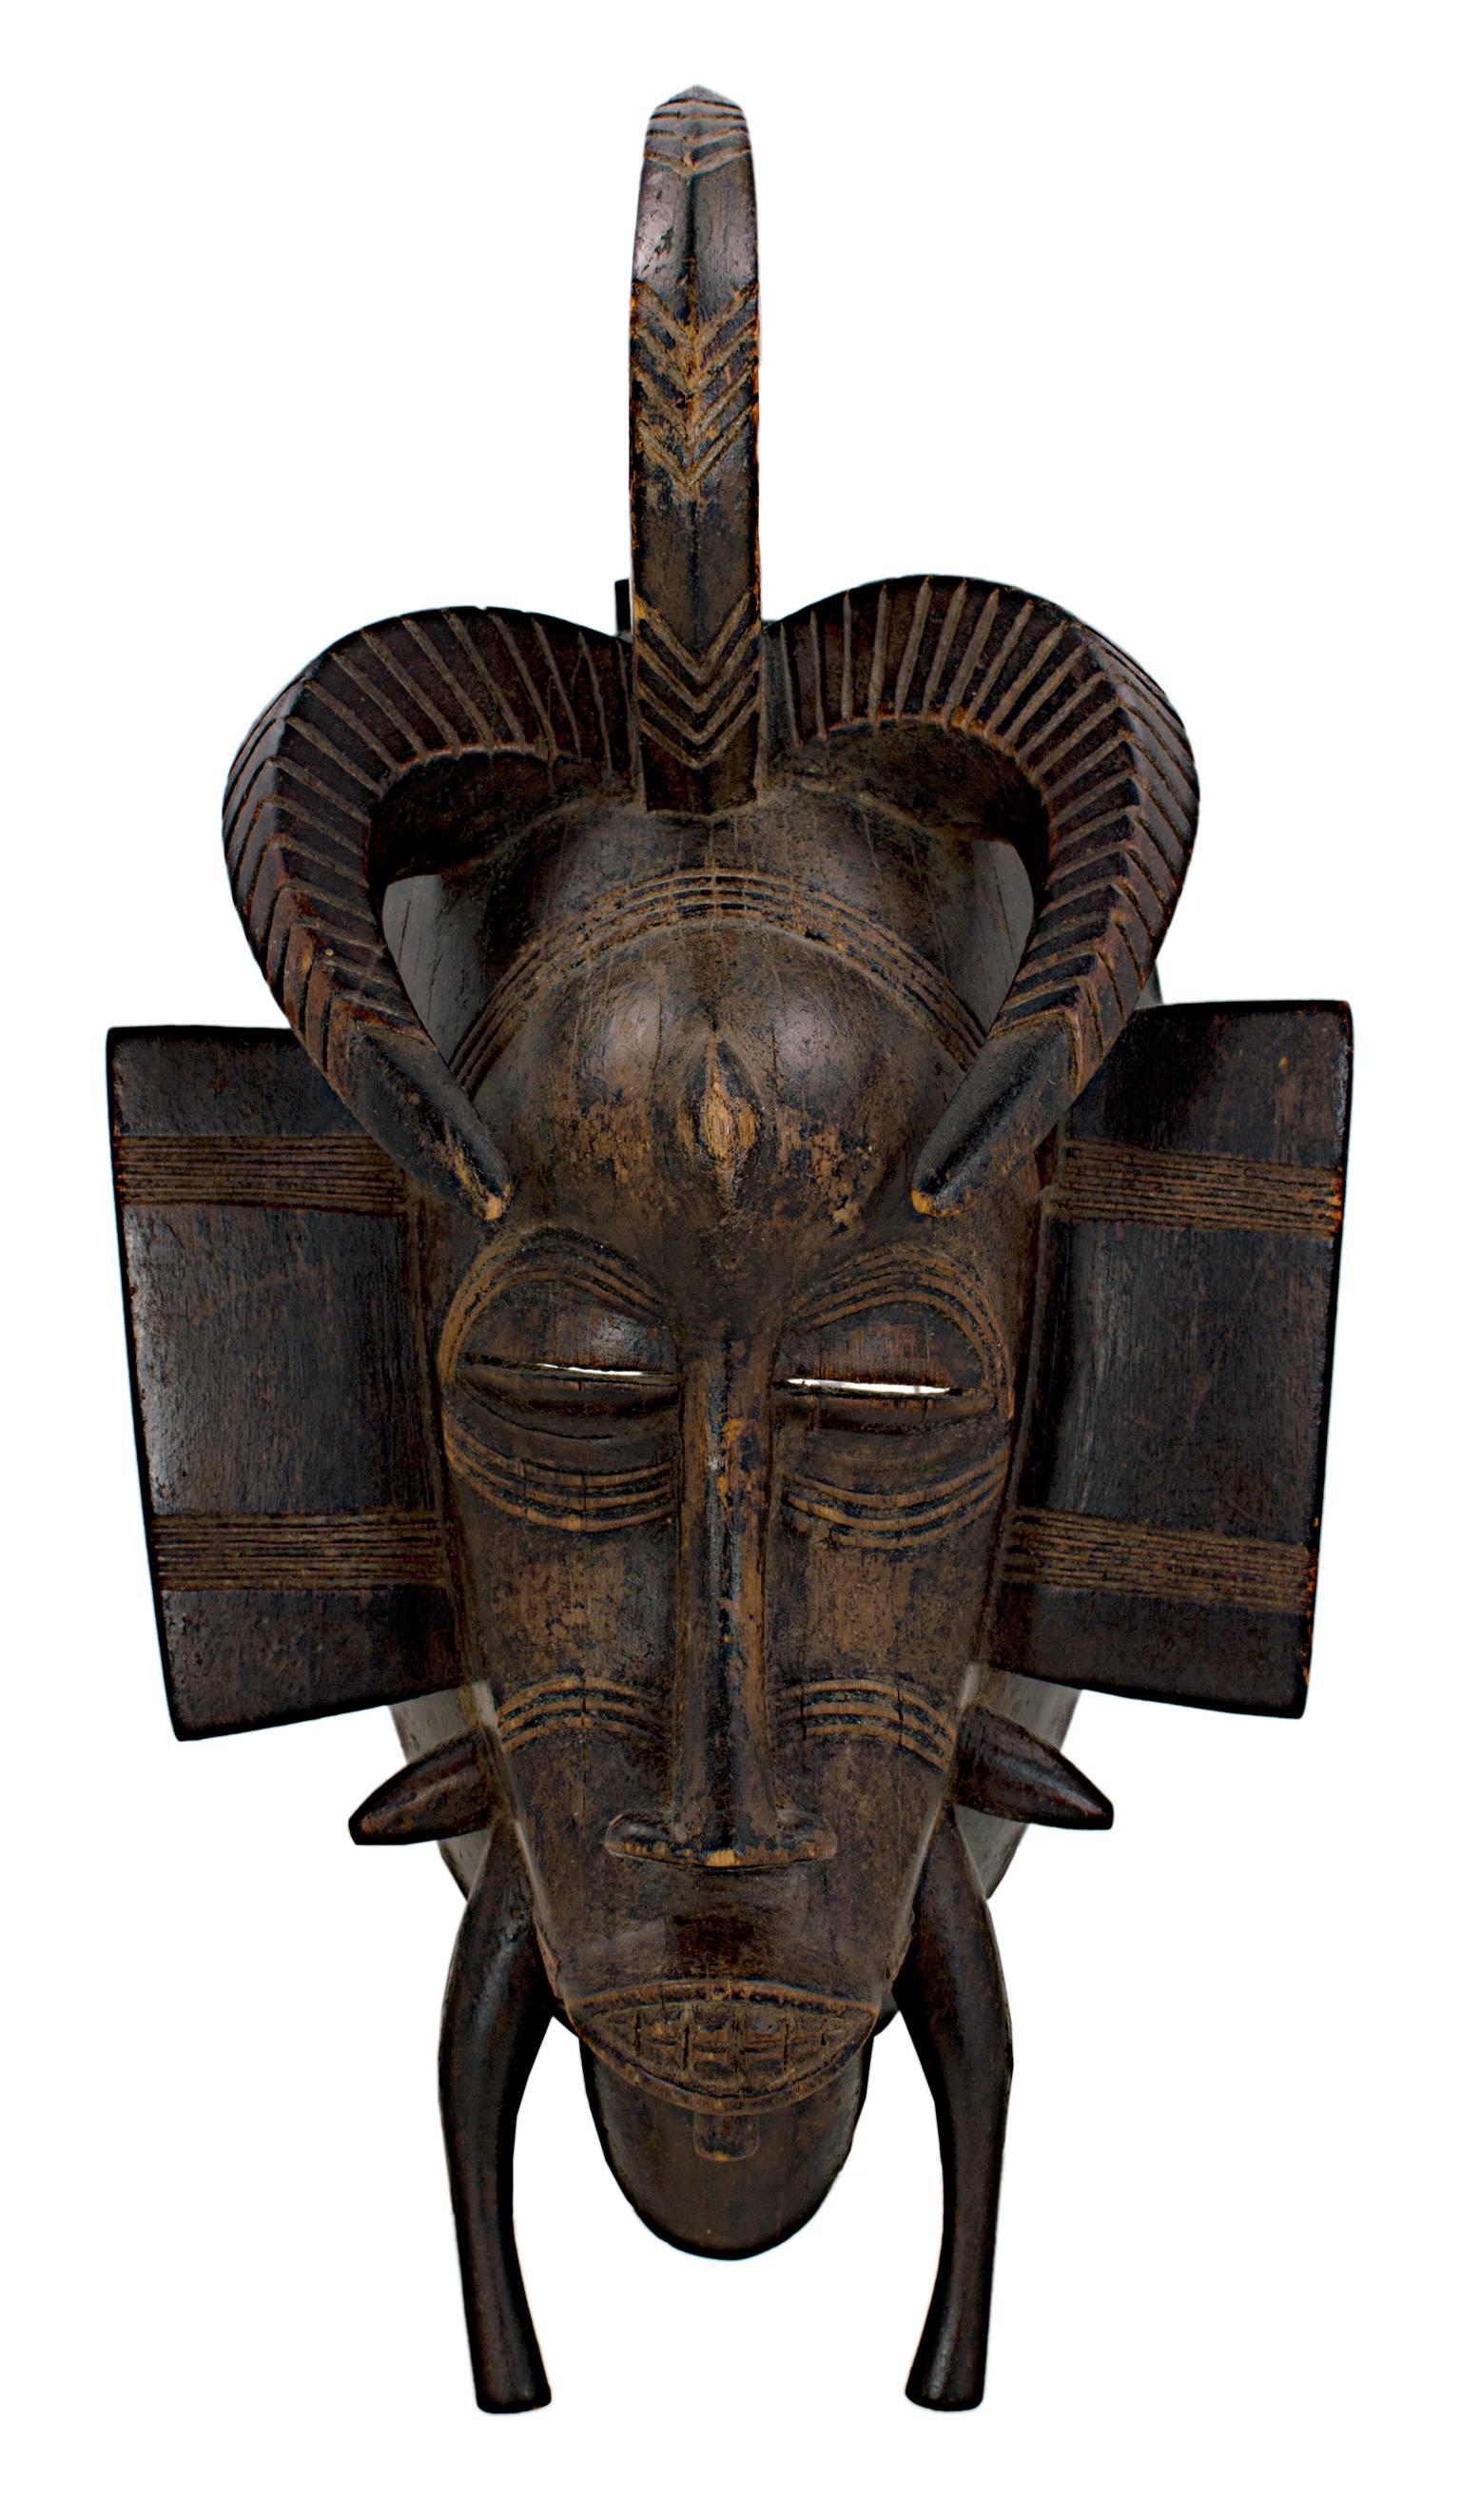 What are the features of a Senufo mask?